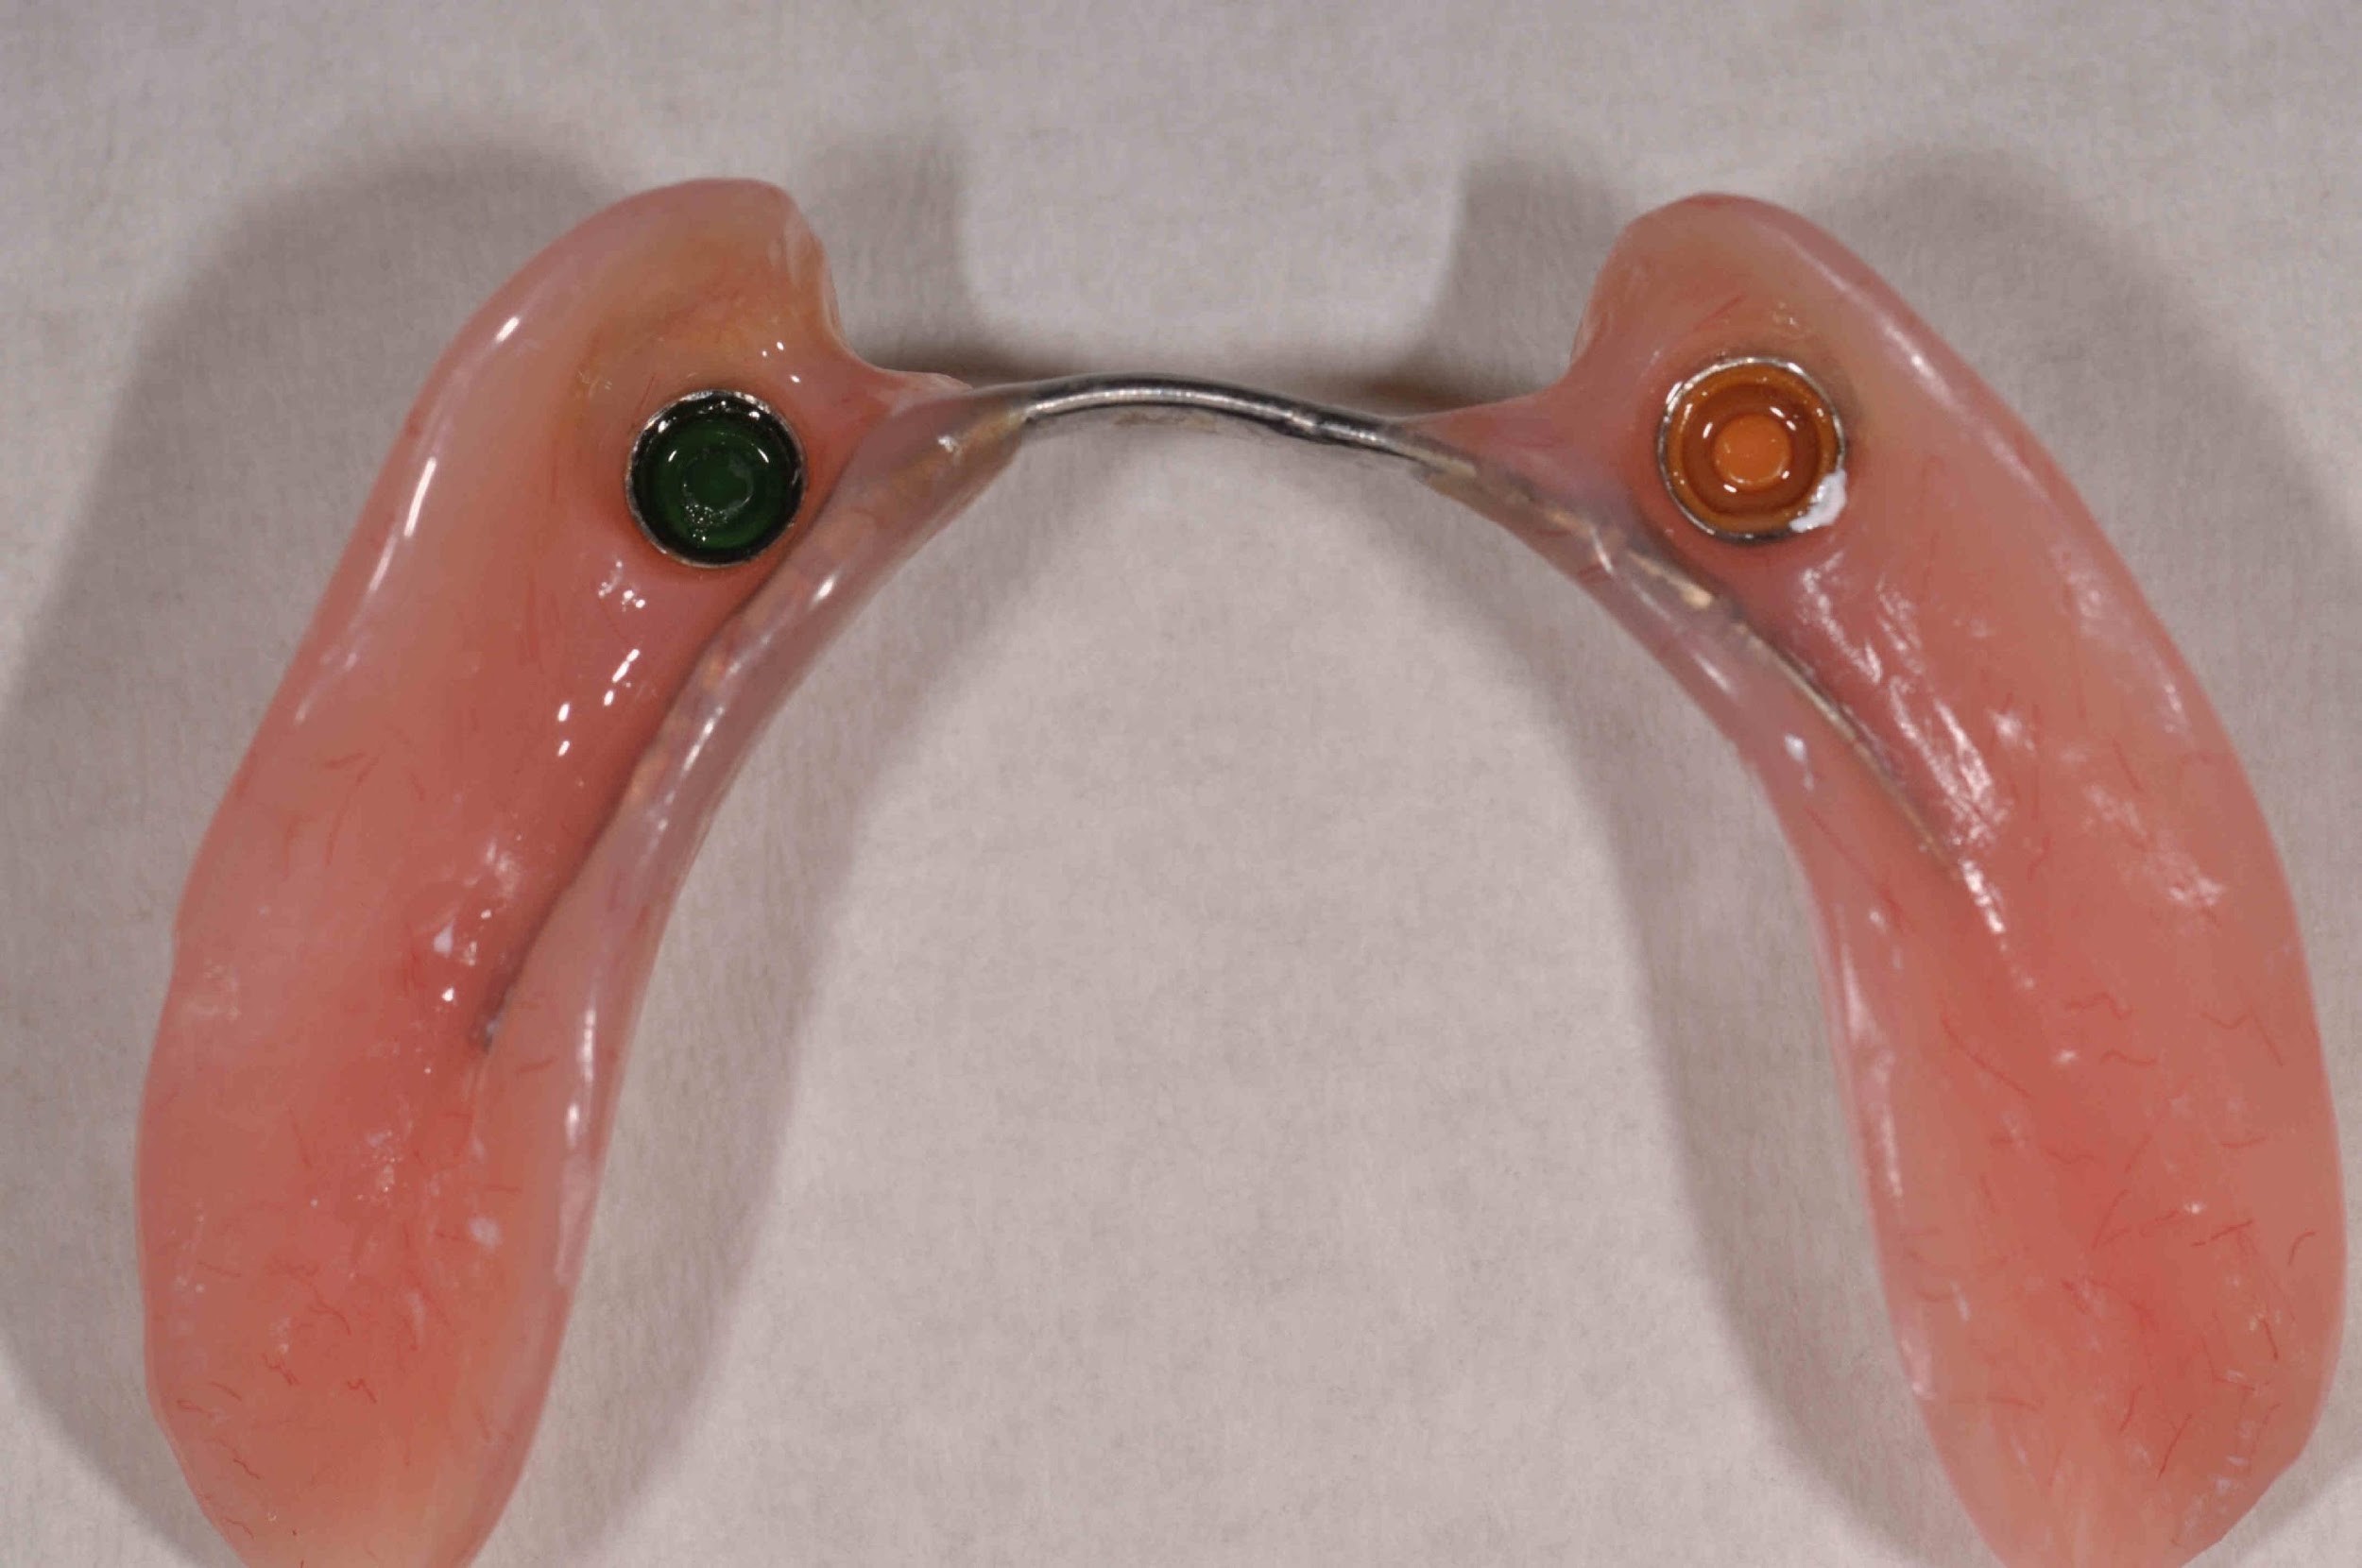 The simple design of the overdenture